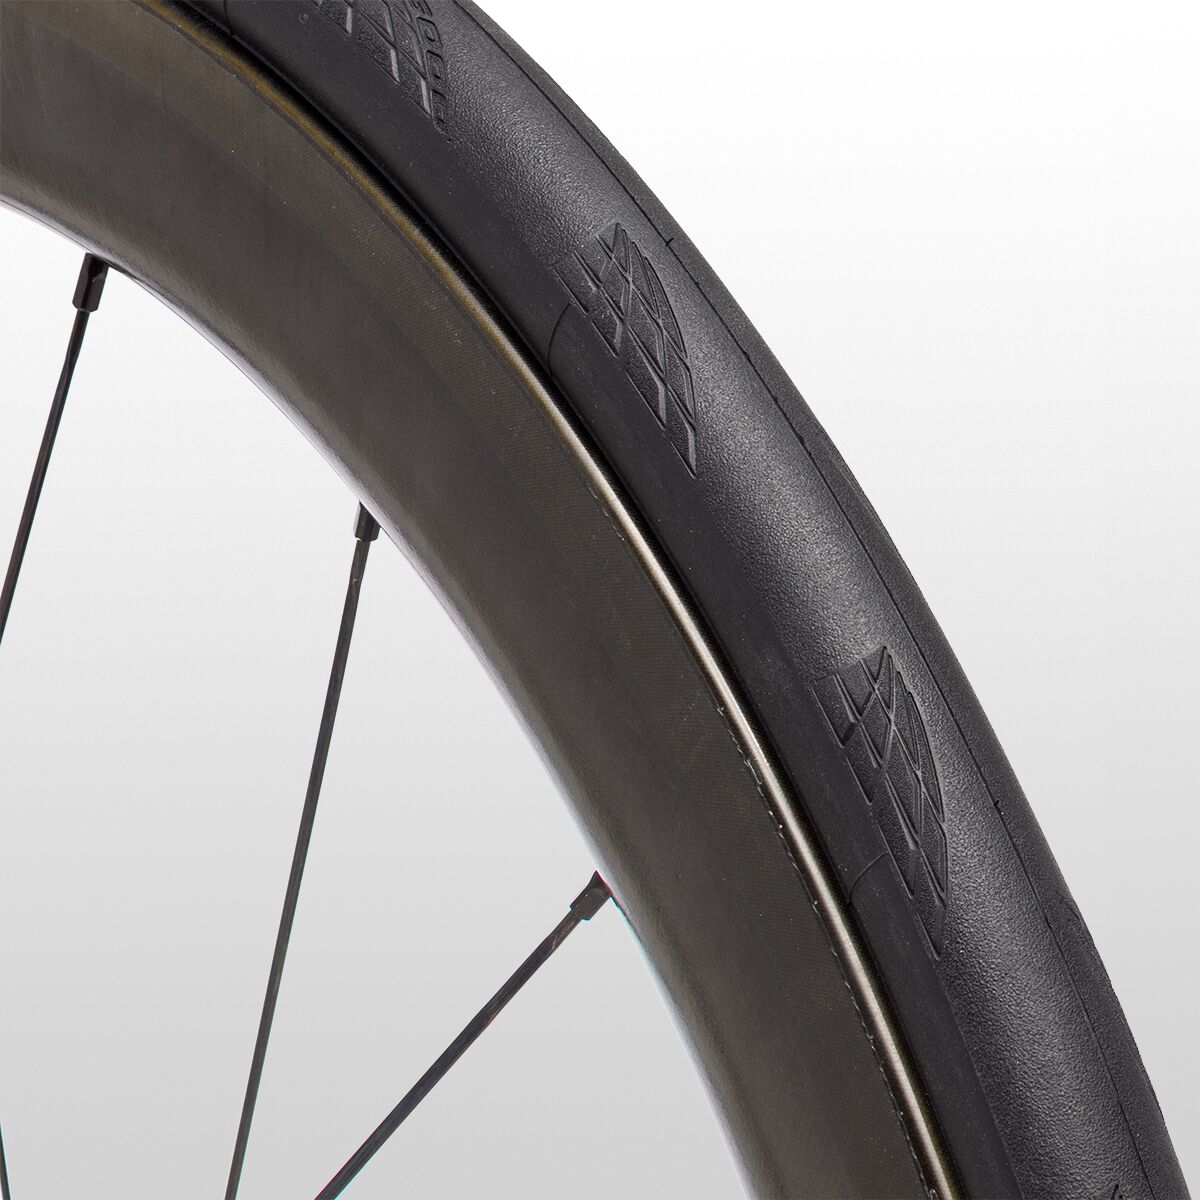 Review: Continental Grand Prix 5000 TL tubeless tyre